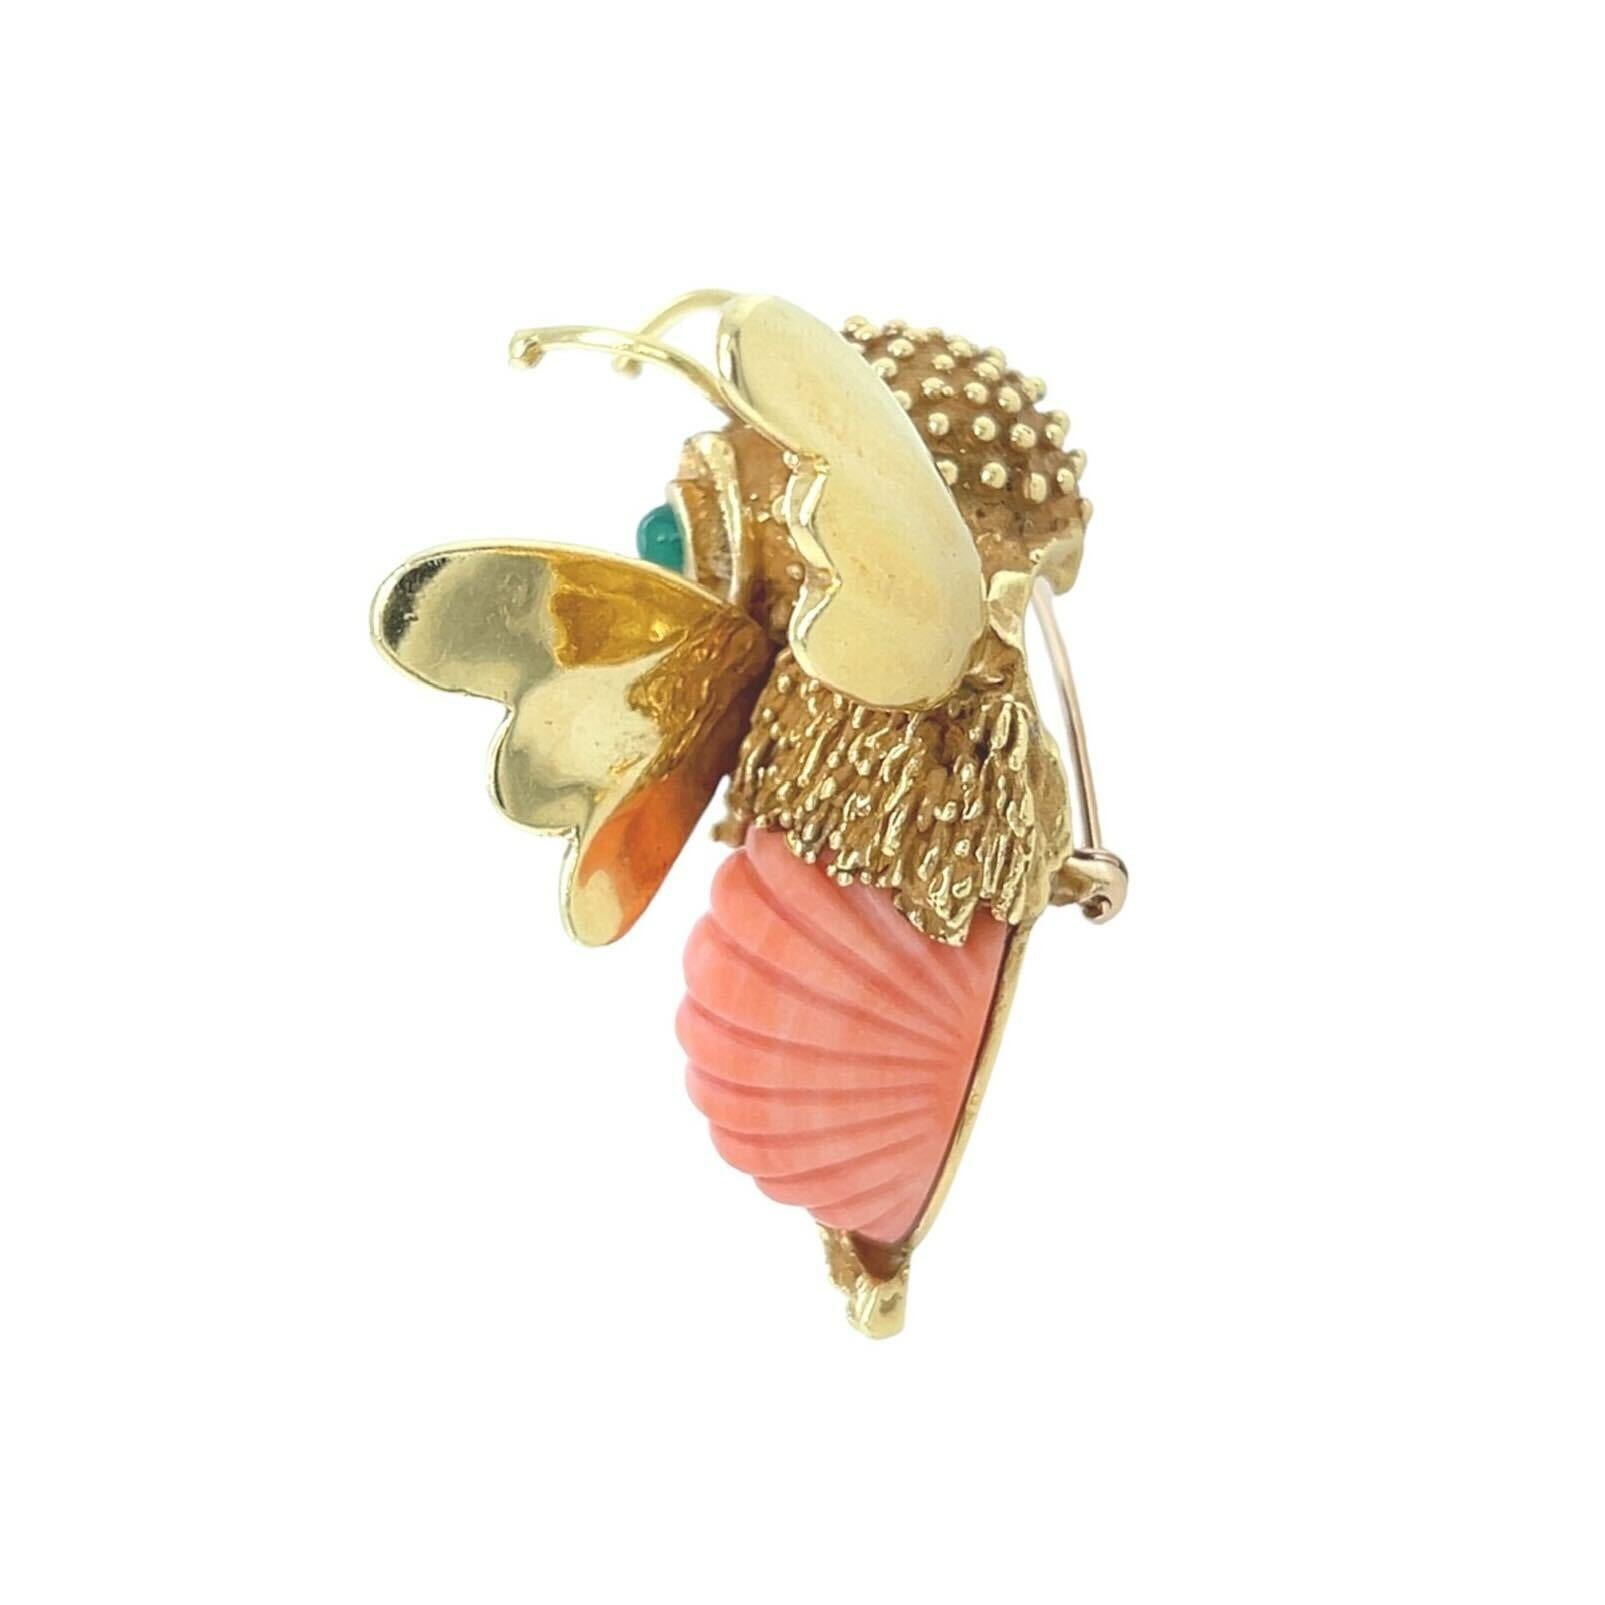 An 18 karat yellow gold, coral and chrysoprase bee brooch, Erwin Pearl.  Designed as a bee, its abdomen formed by a fluted oval light orange coral, its eyes of two round cabochon chrysoprases, its head of beadwork texture and thorax of shaggy